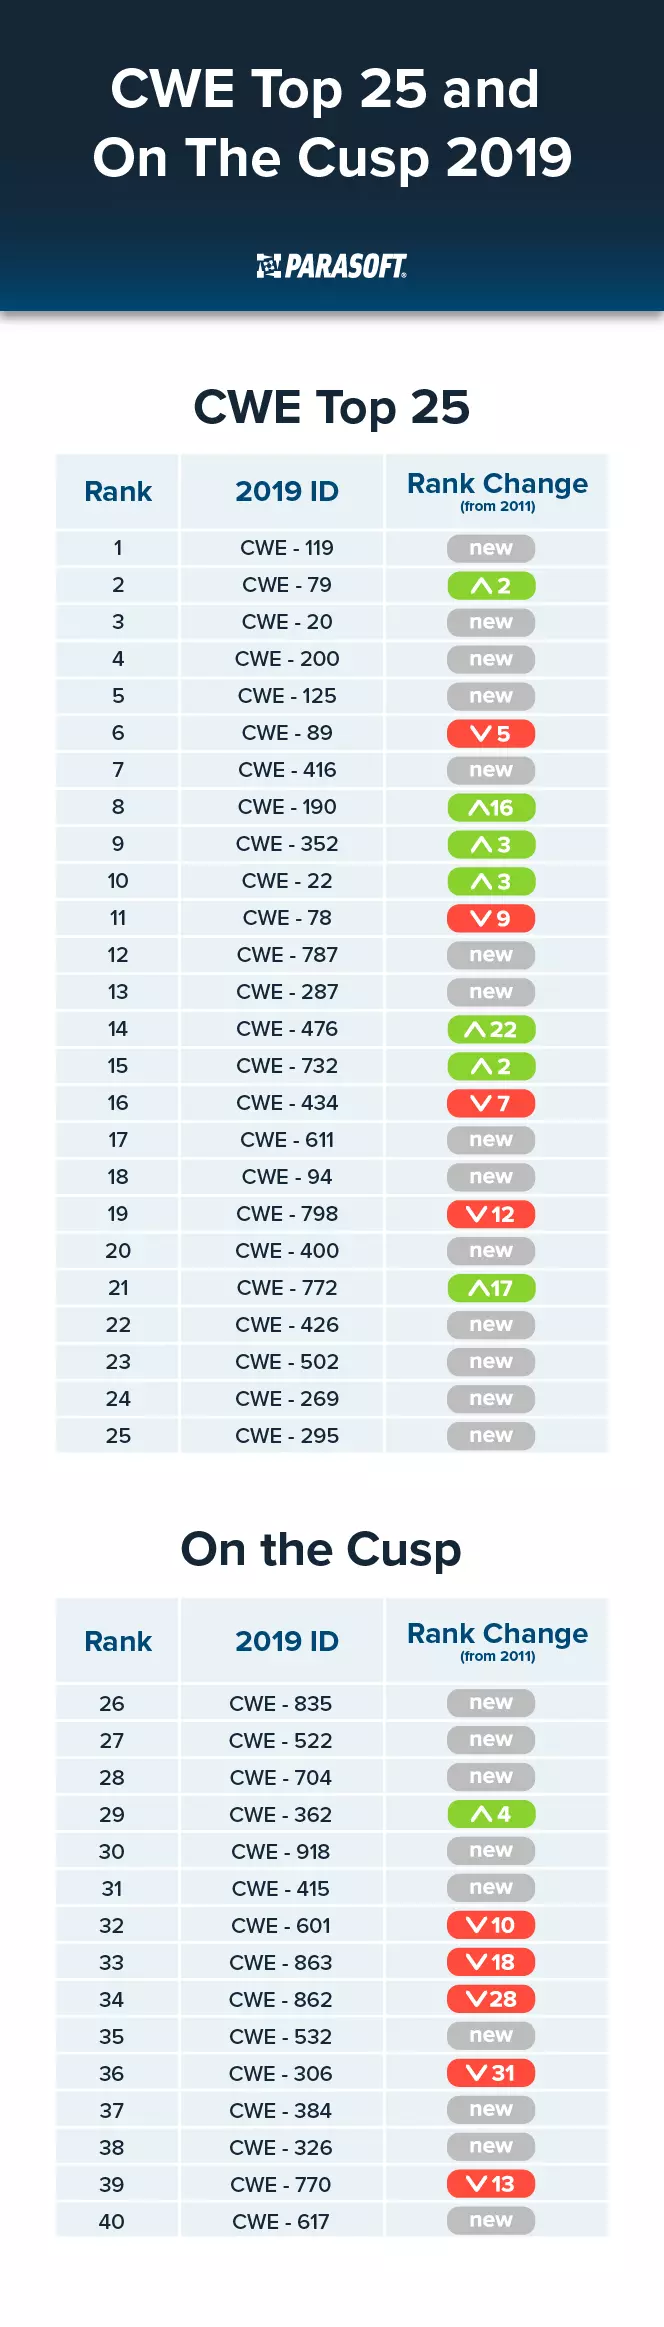 An Overview of the CWE Top 25 and On the Cusp Latest Updates